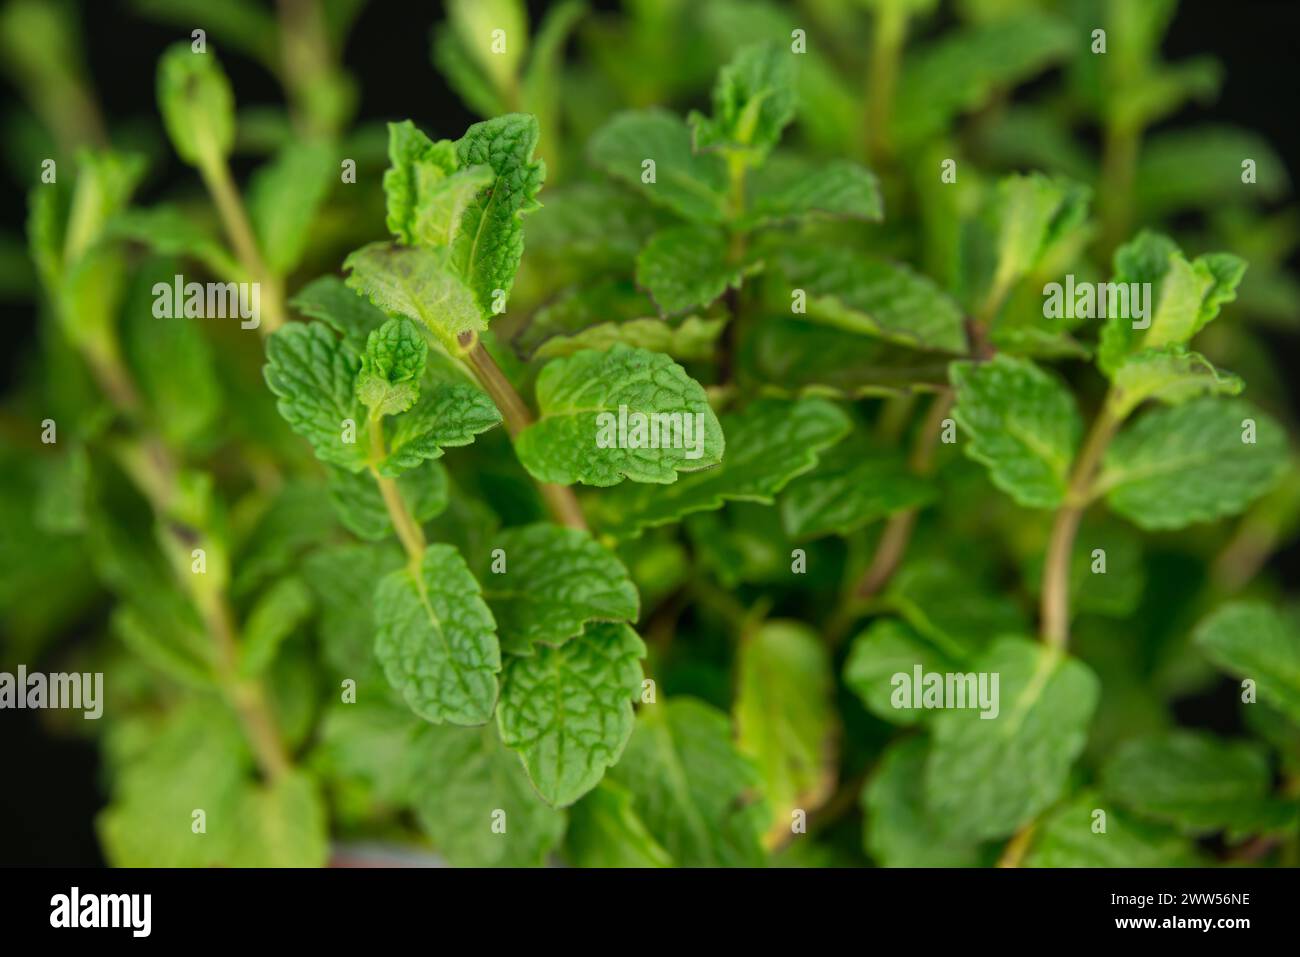 Closeup of mint leaves with small hairs and texture on black background, selective focus on one leaf. Stock Photo